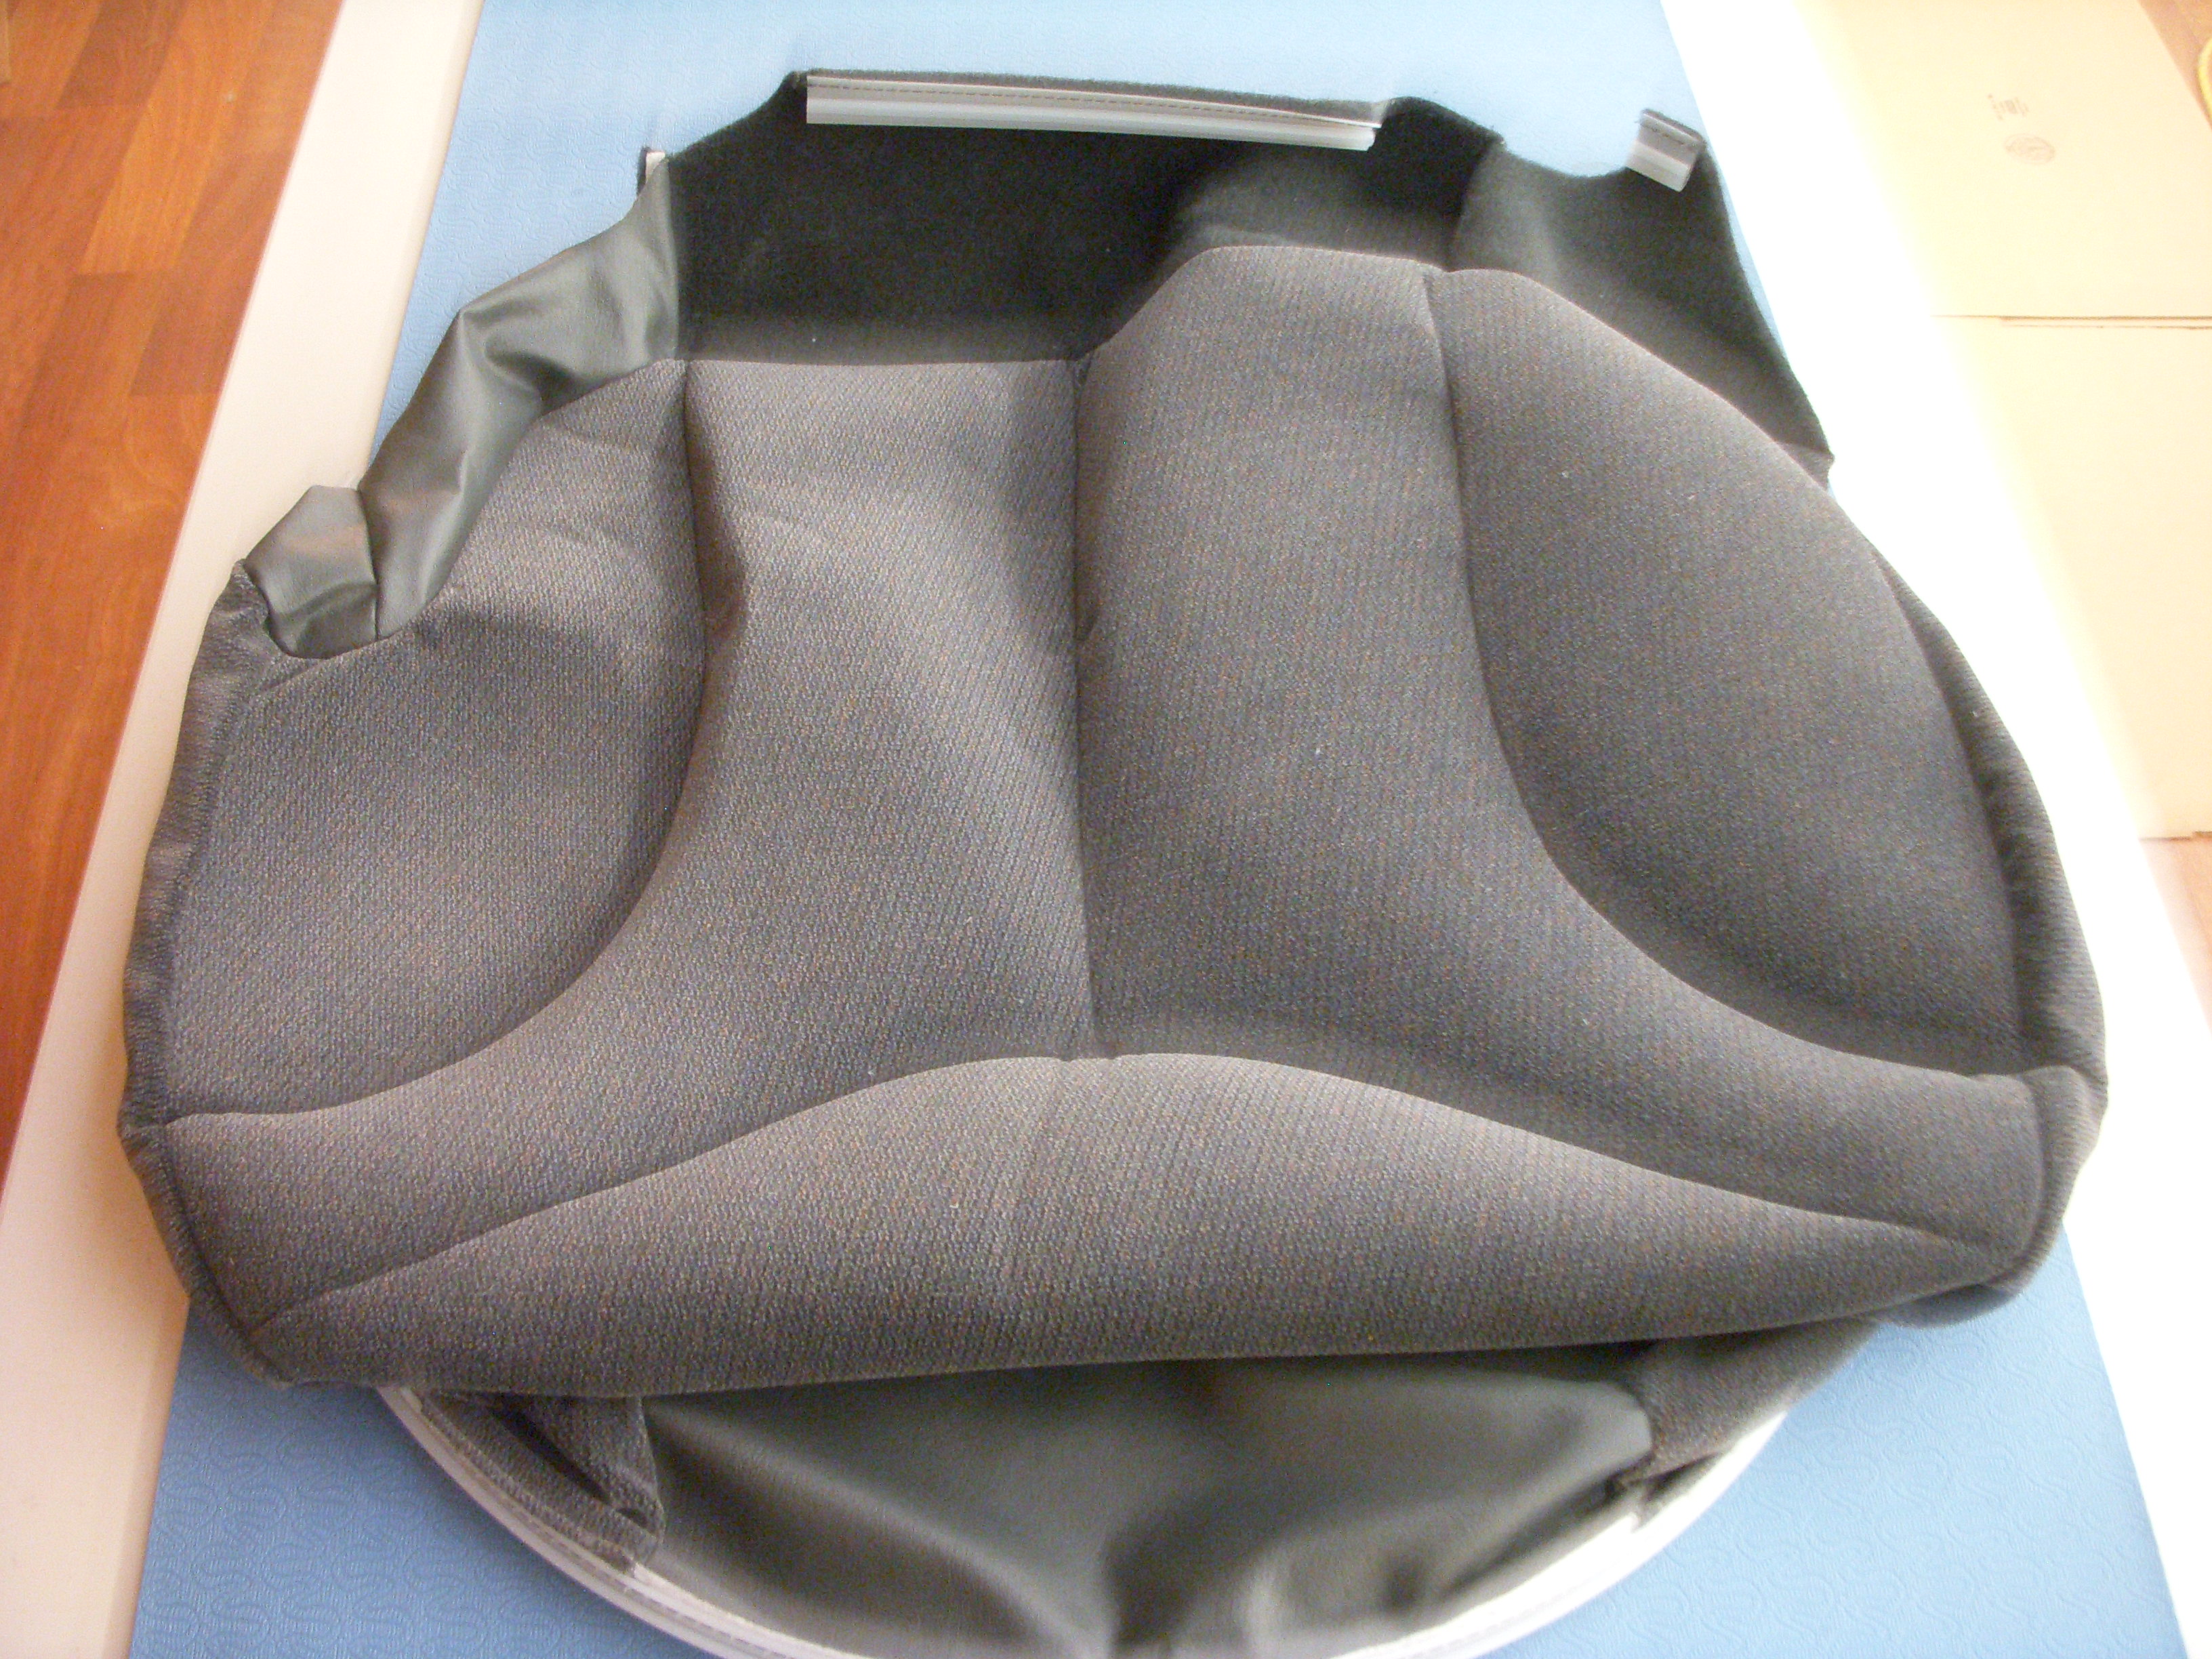 2000 - 2001 Cadillac, Chevrolet and GMC Truck Cloth Drivers Seat Cover NOS # 88934542